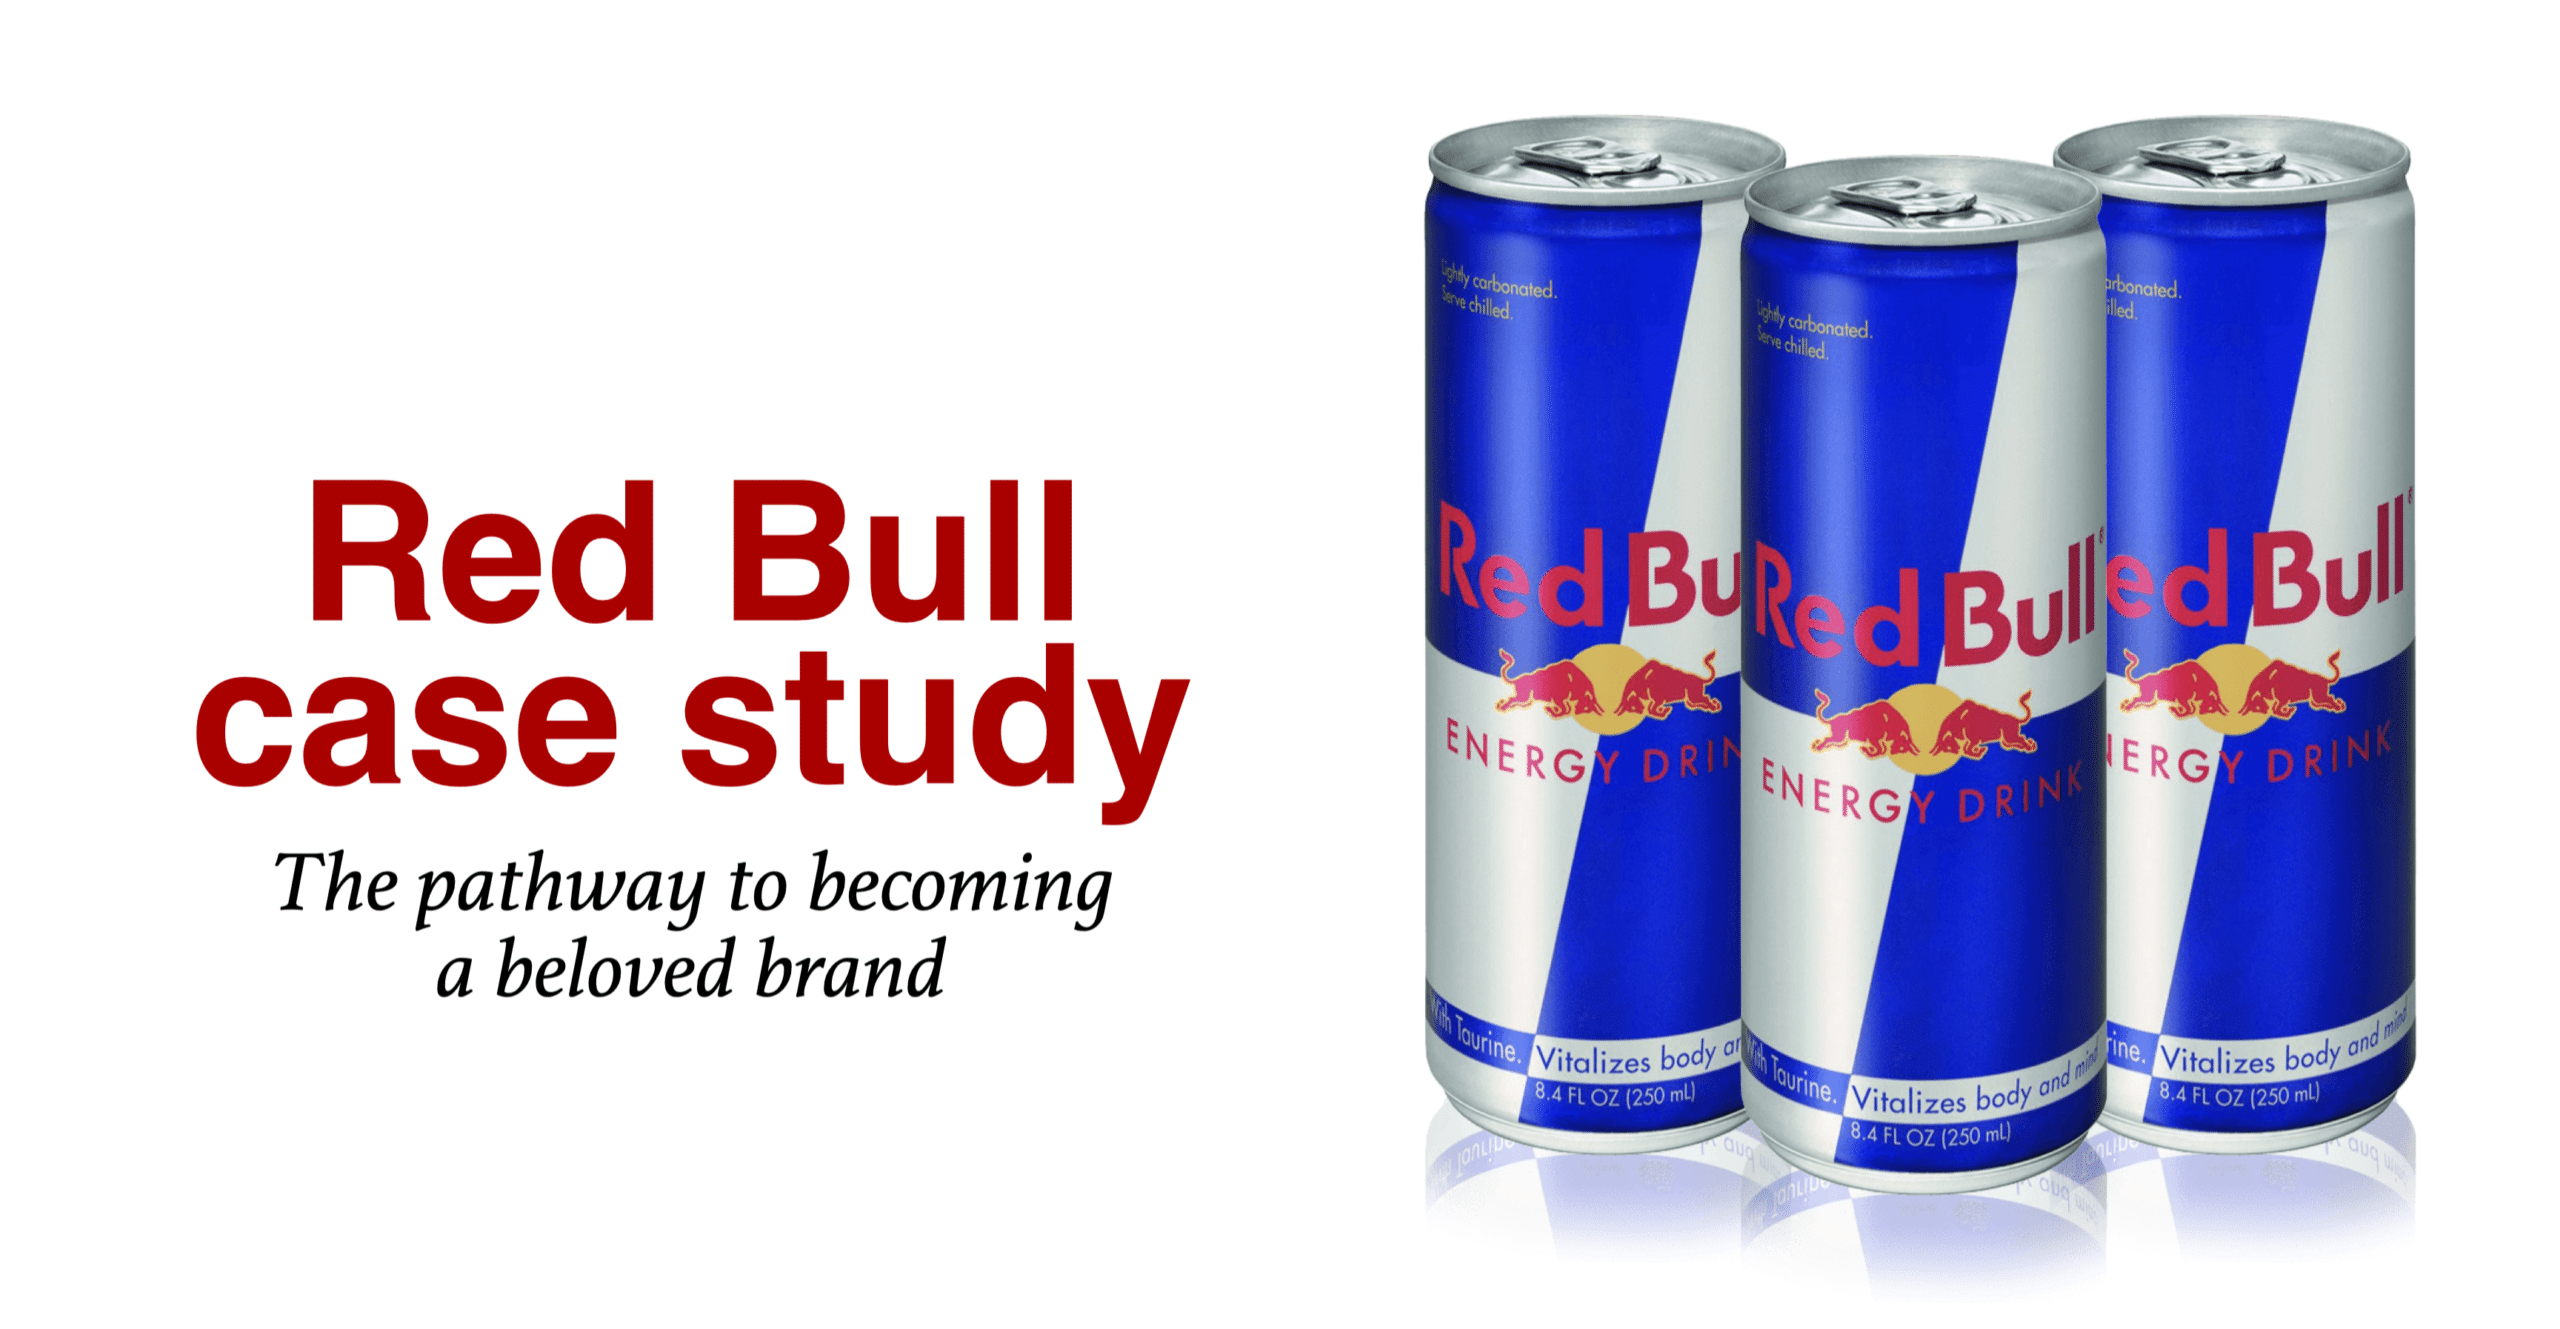 Red Bull Case Study Red Bull brand is backed by Red Bull advertising and the unique Red Bull brand positioning